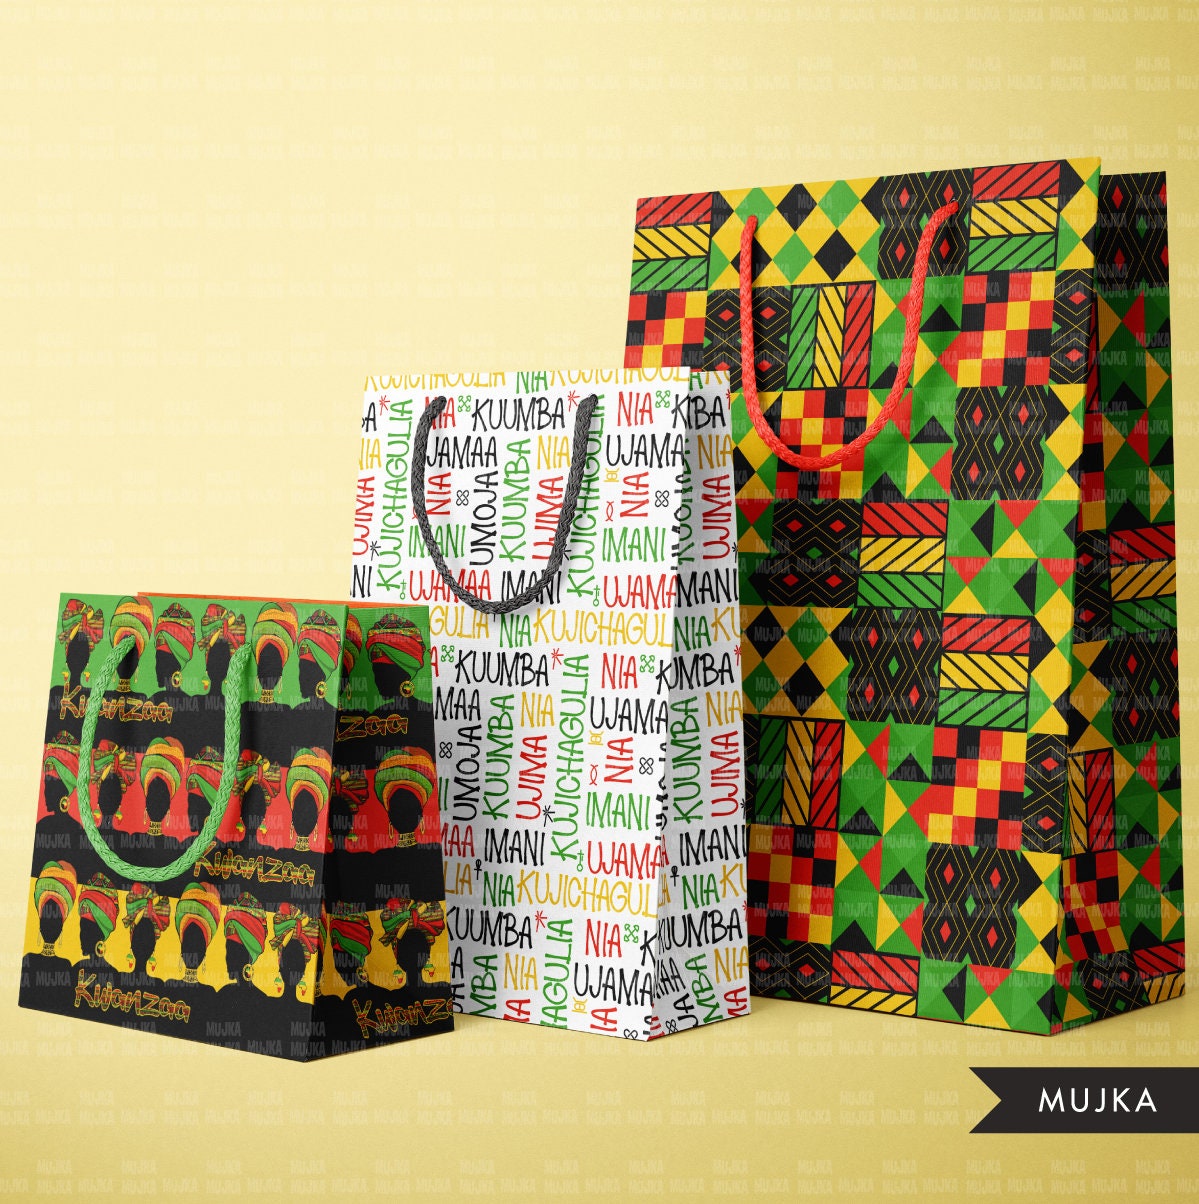 Kwanzaa digital papers, Kwanzaa backgrounds, Kwanzaa digital patterns,  Happy Kwanzaa designs, Kwanzaa sublimation designs, African papers, black